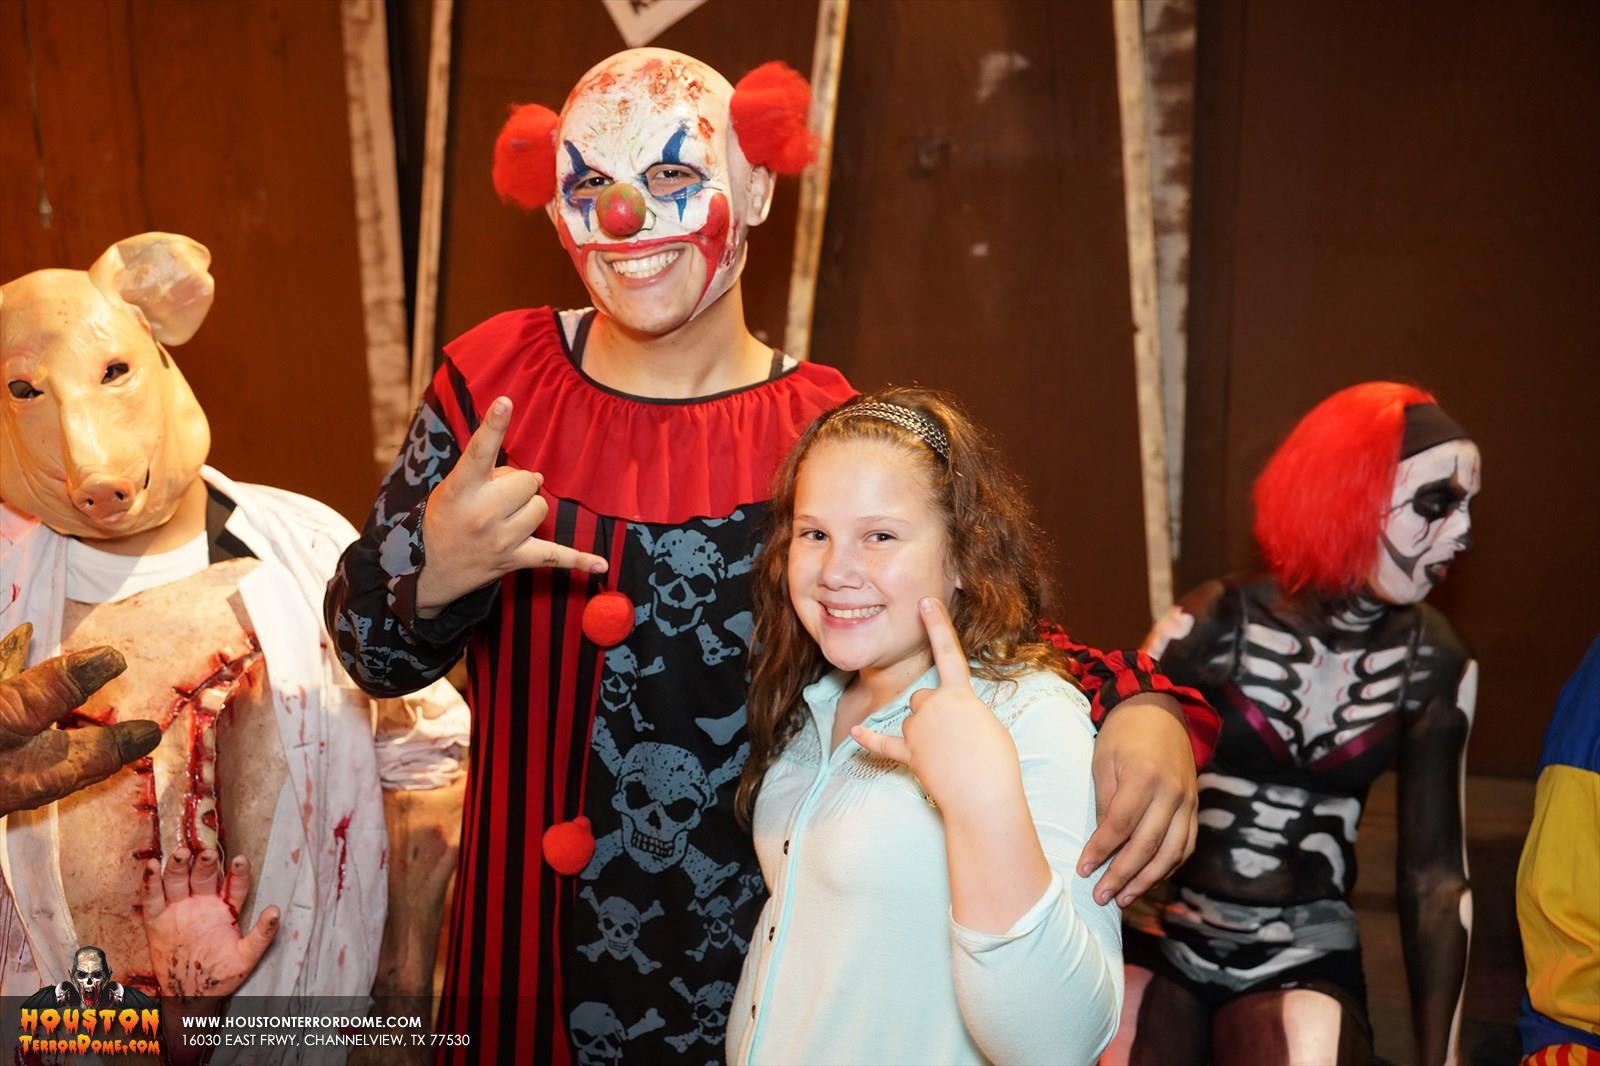 Clown from Haunted House Posses for picture with customer.